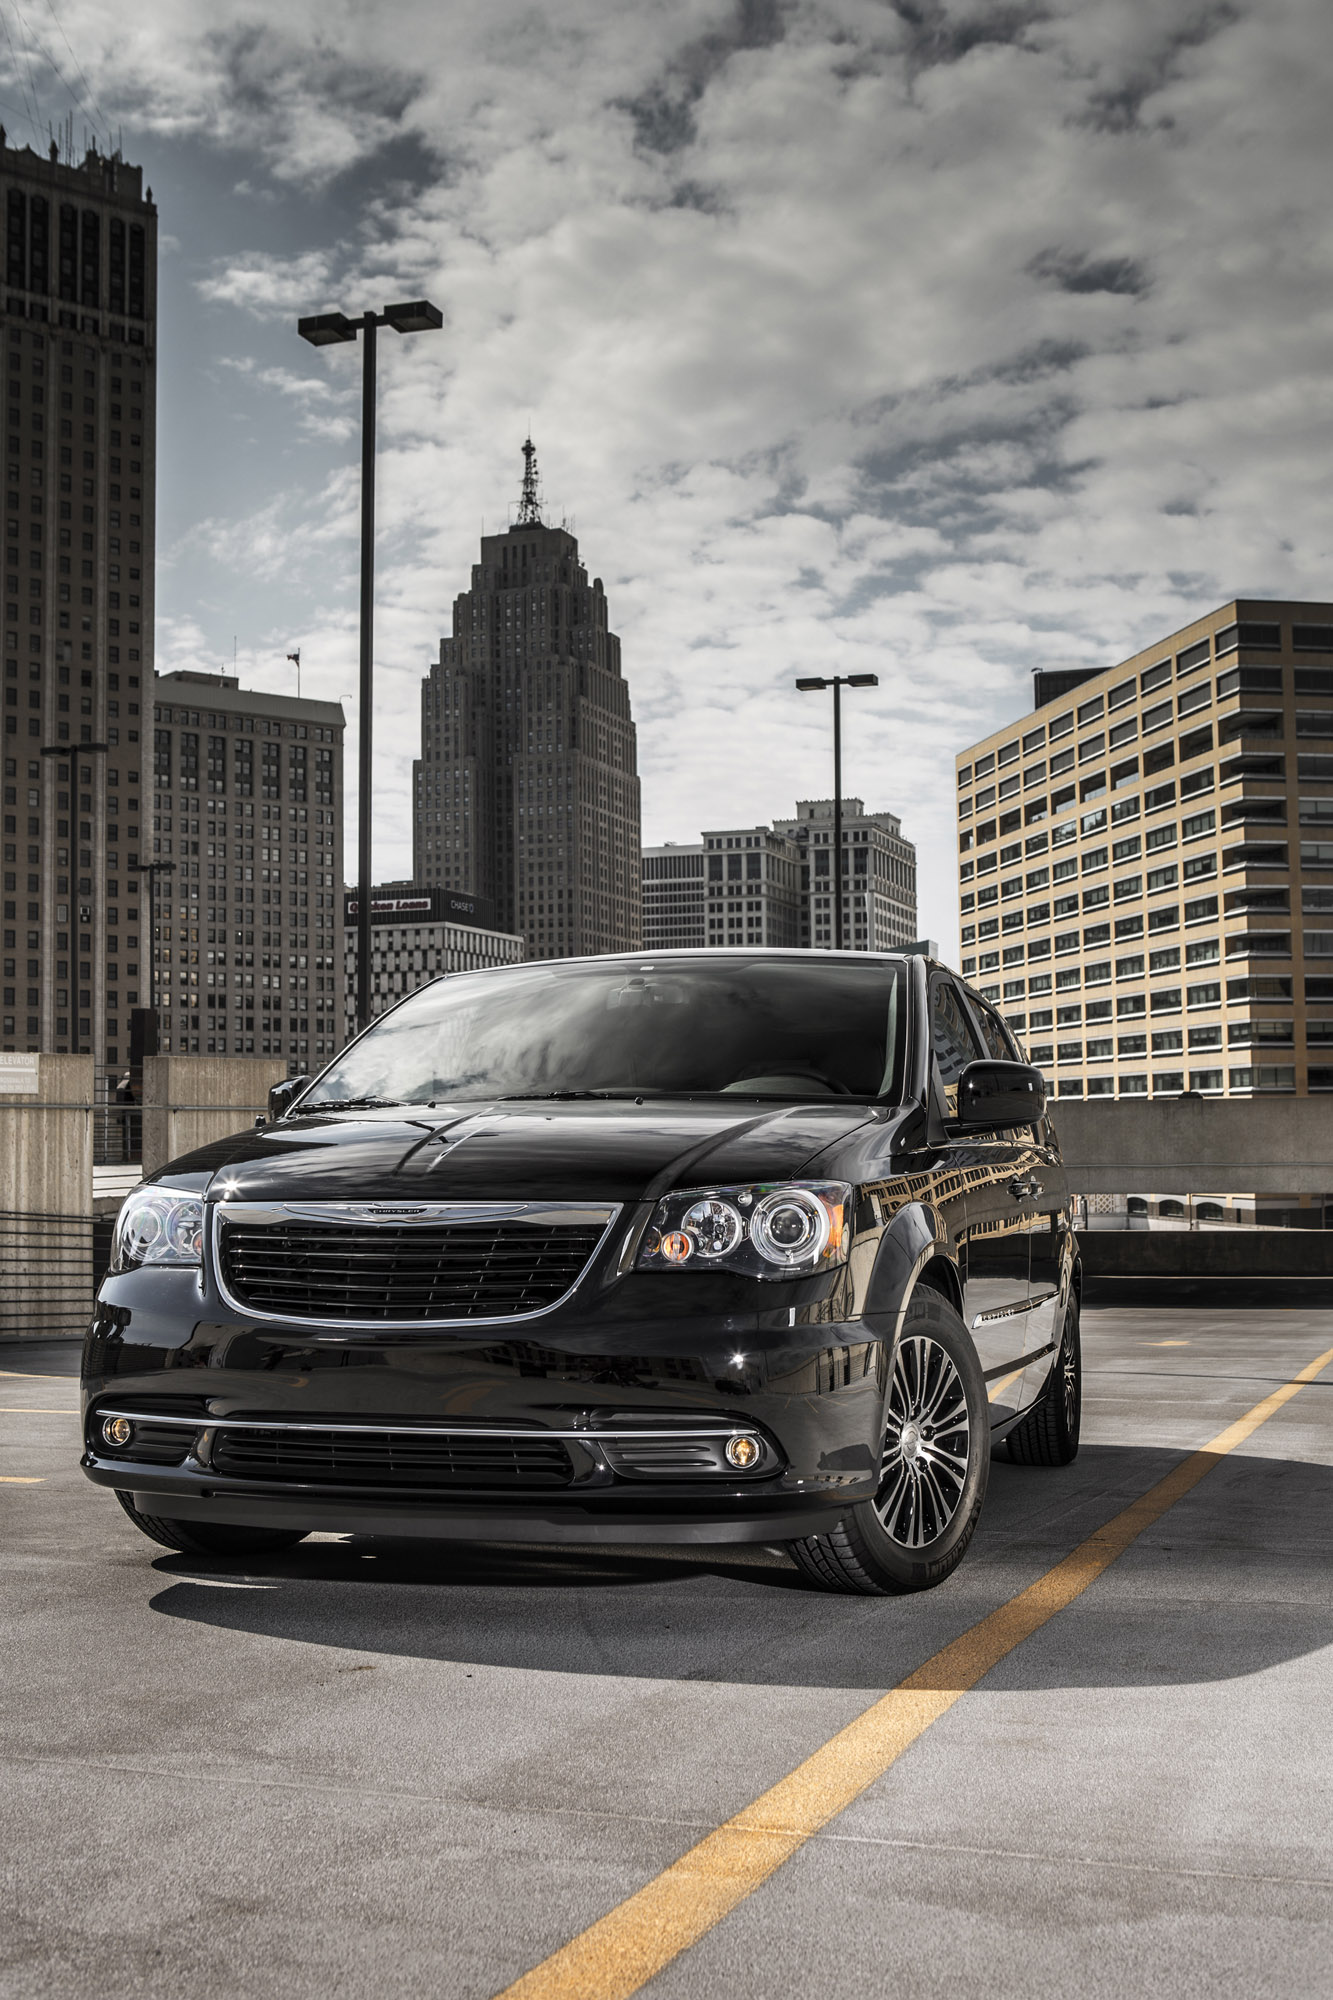 Chrysler Town And Country S